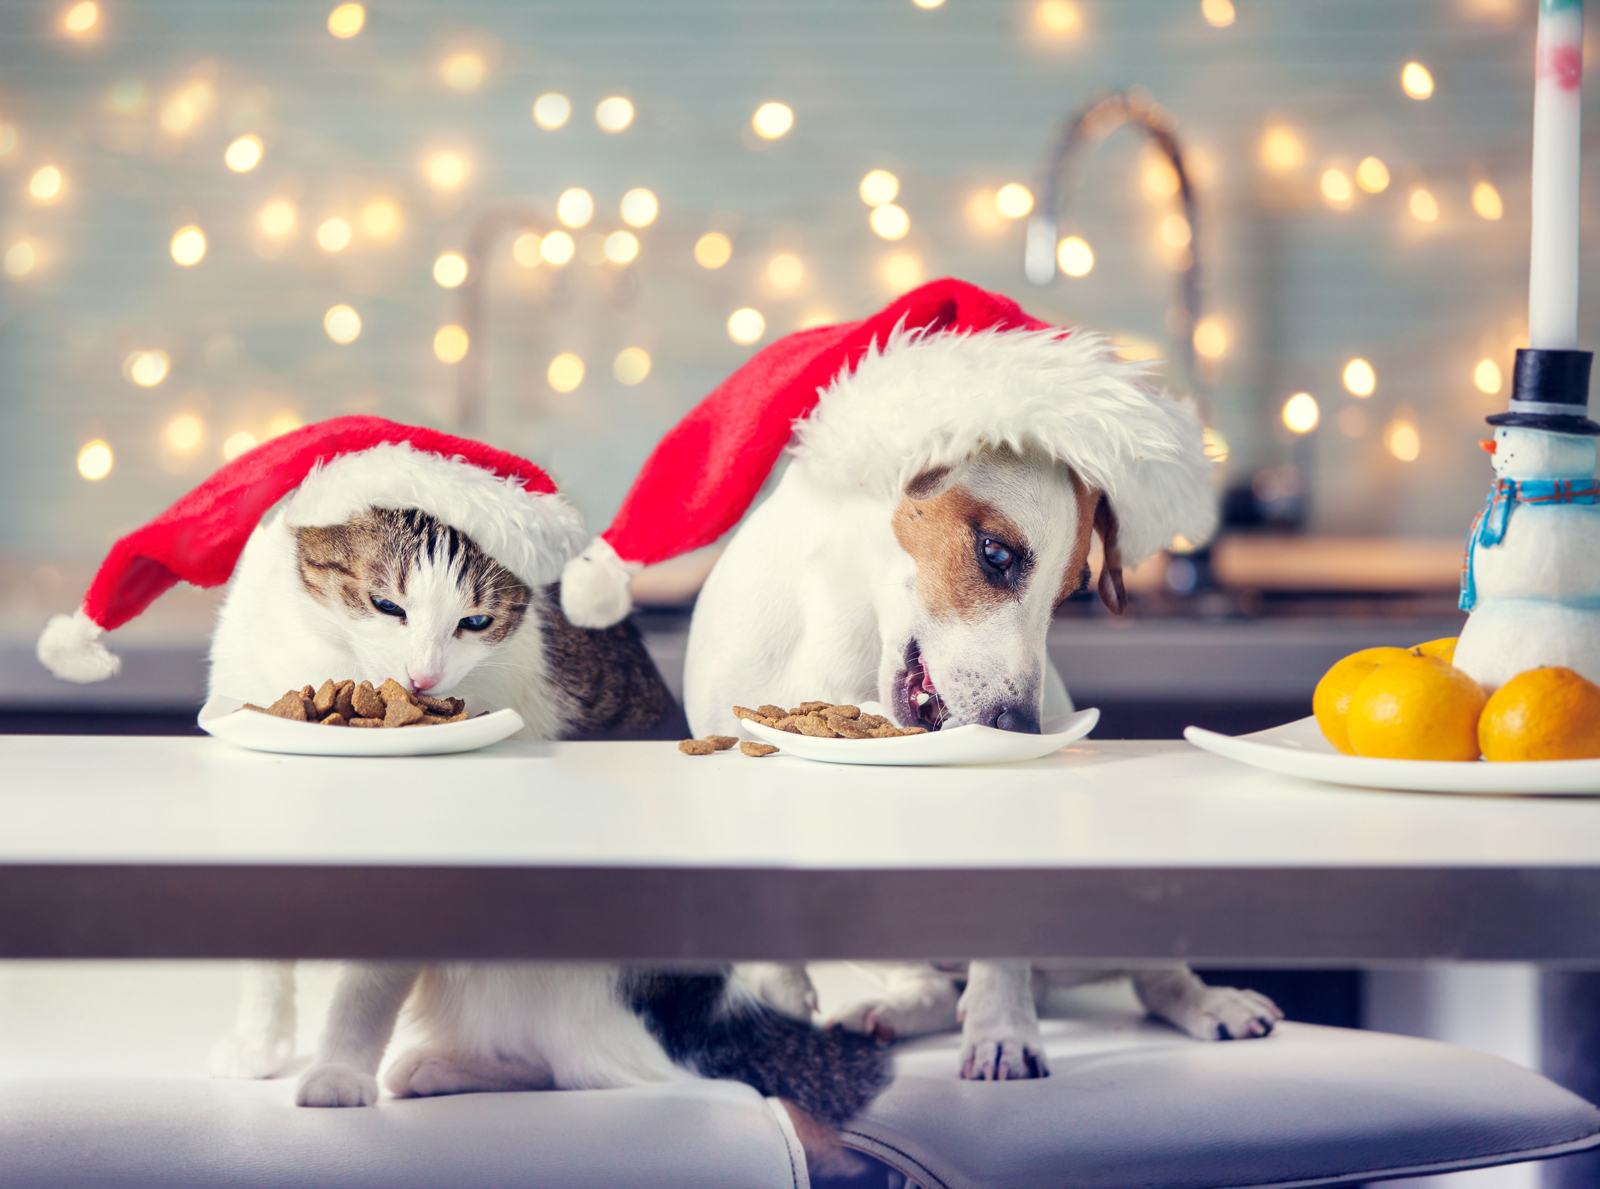 A dog and cat eating left over food from plates wearing santa hats